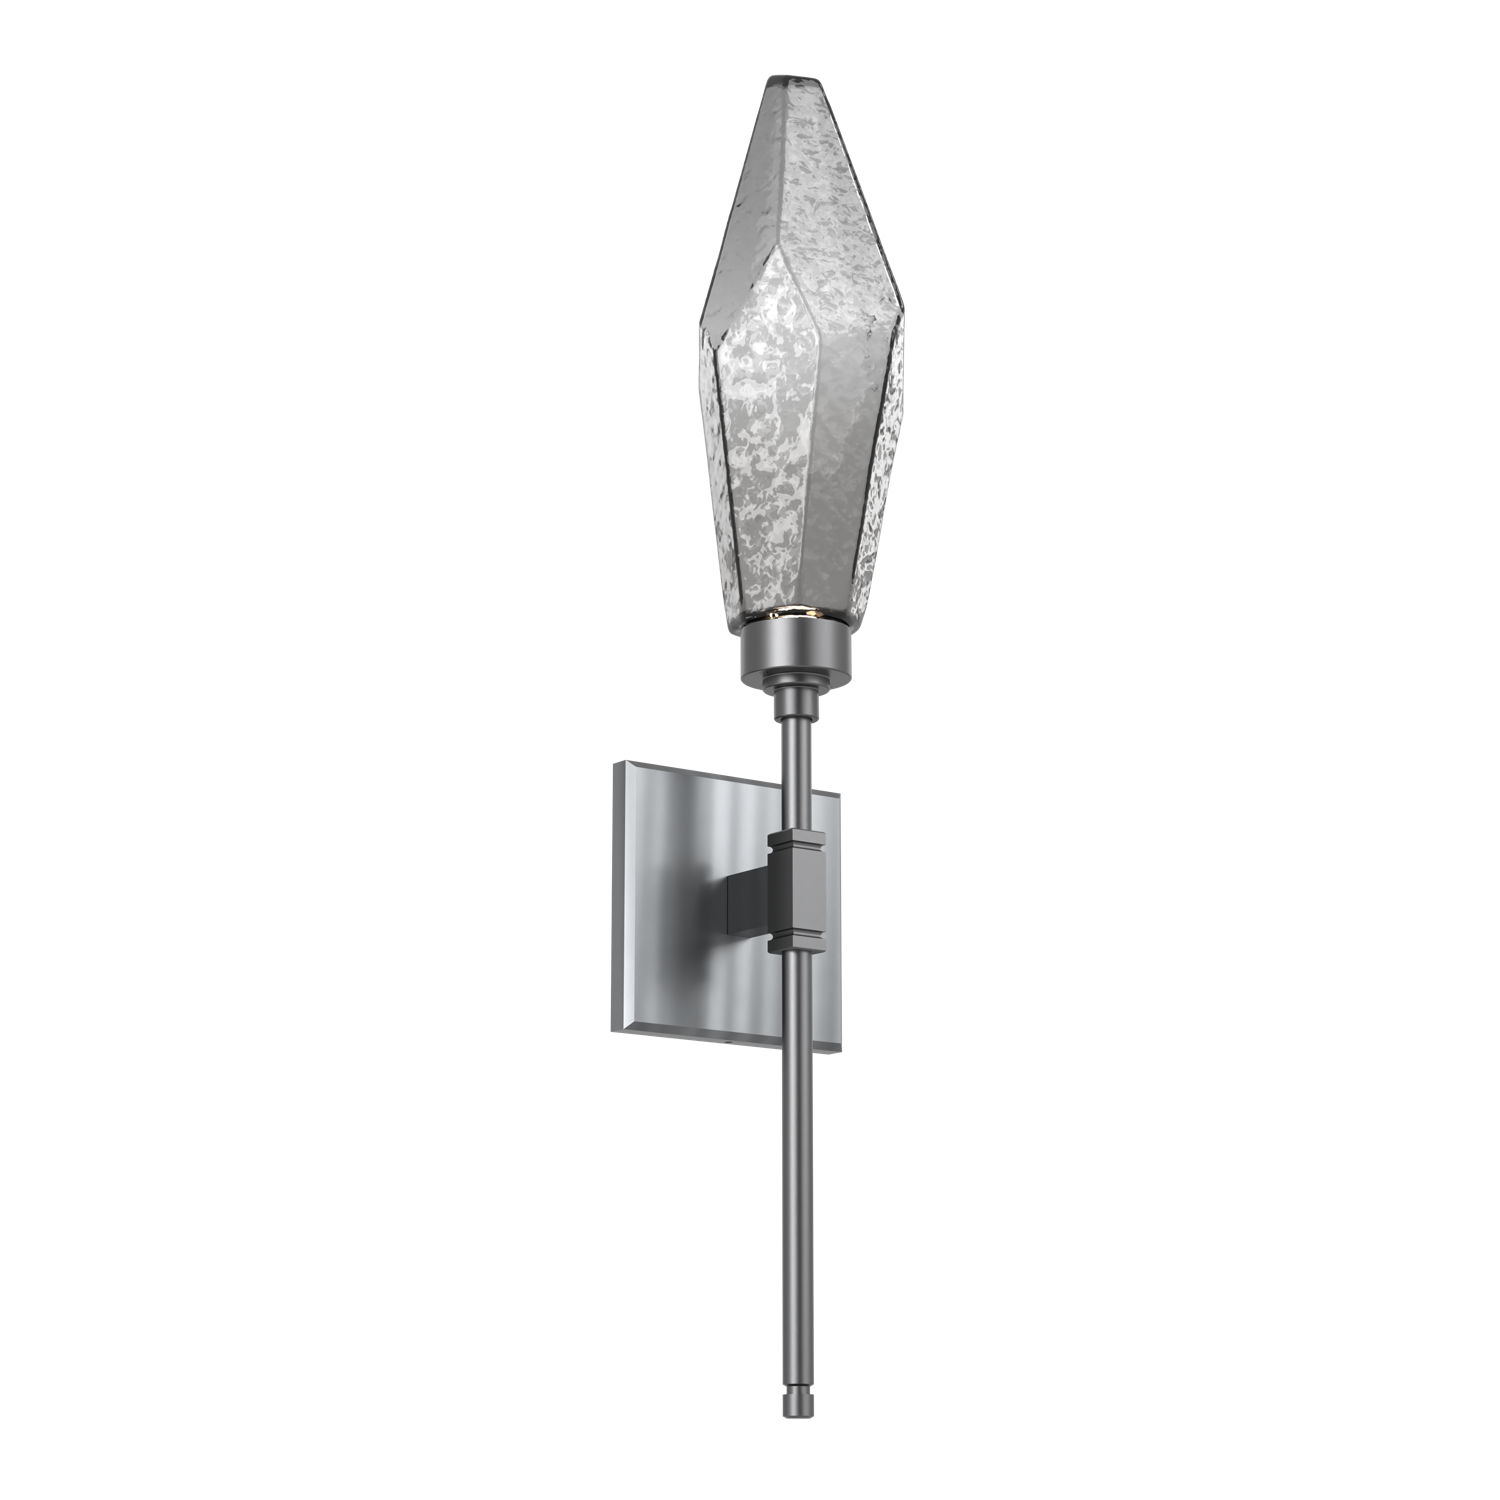 IDB0050-04-GM-CS-Hammerton-Studio-Rock-Crystal-ada-certified-belvedere-wall-sconce-with-gunmetal-finish-and-chilled-smoke-glass-shades-and-LED-lamping